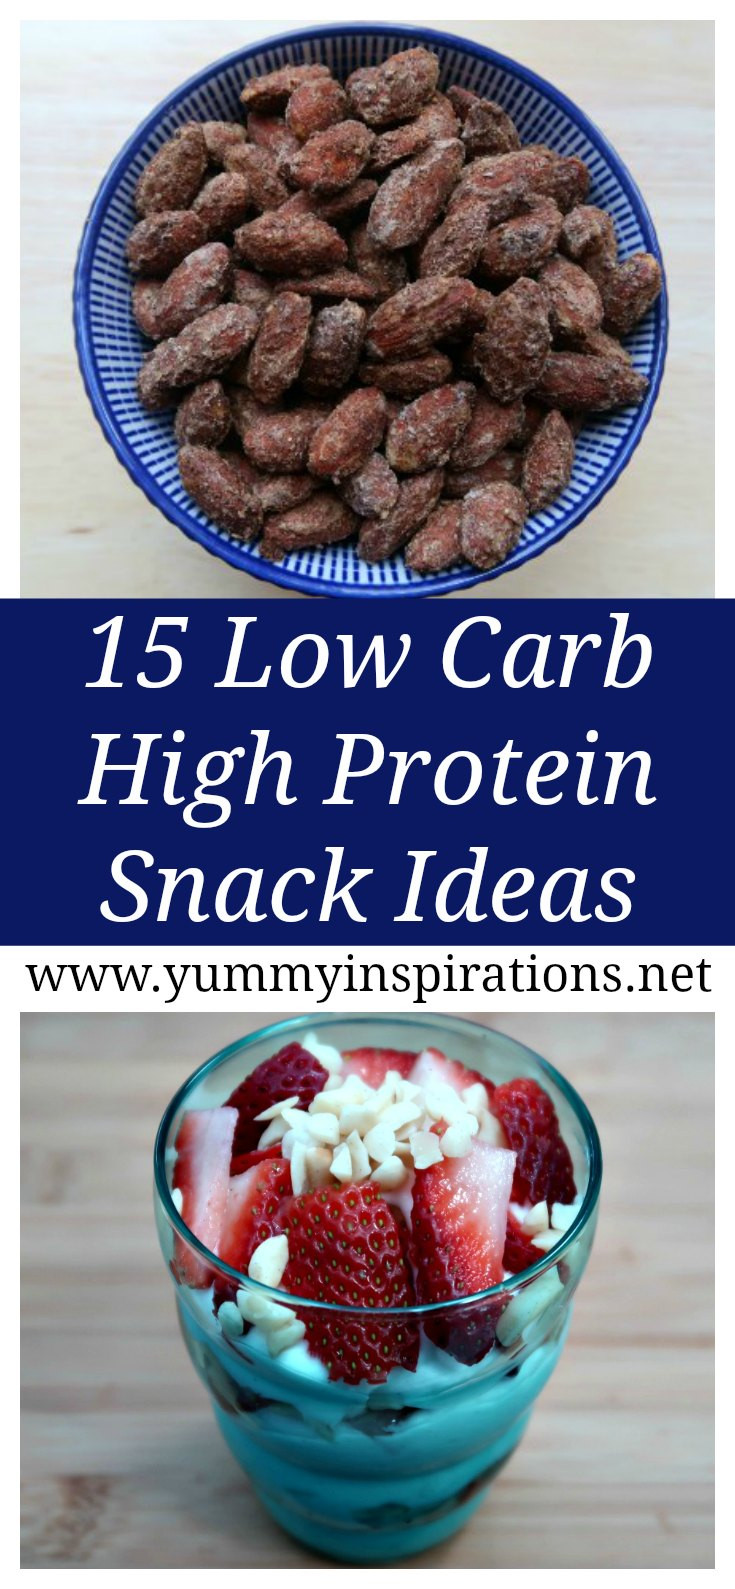 High Protein Snacks Recipes
 15 Low Carb High Protein Snacks Ideas For Easy Keto Diet